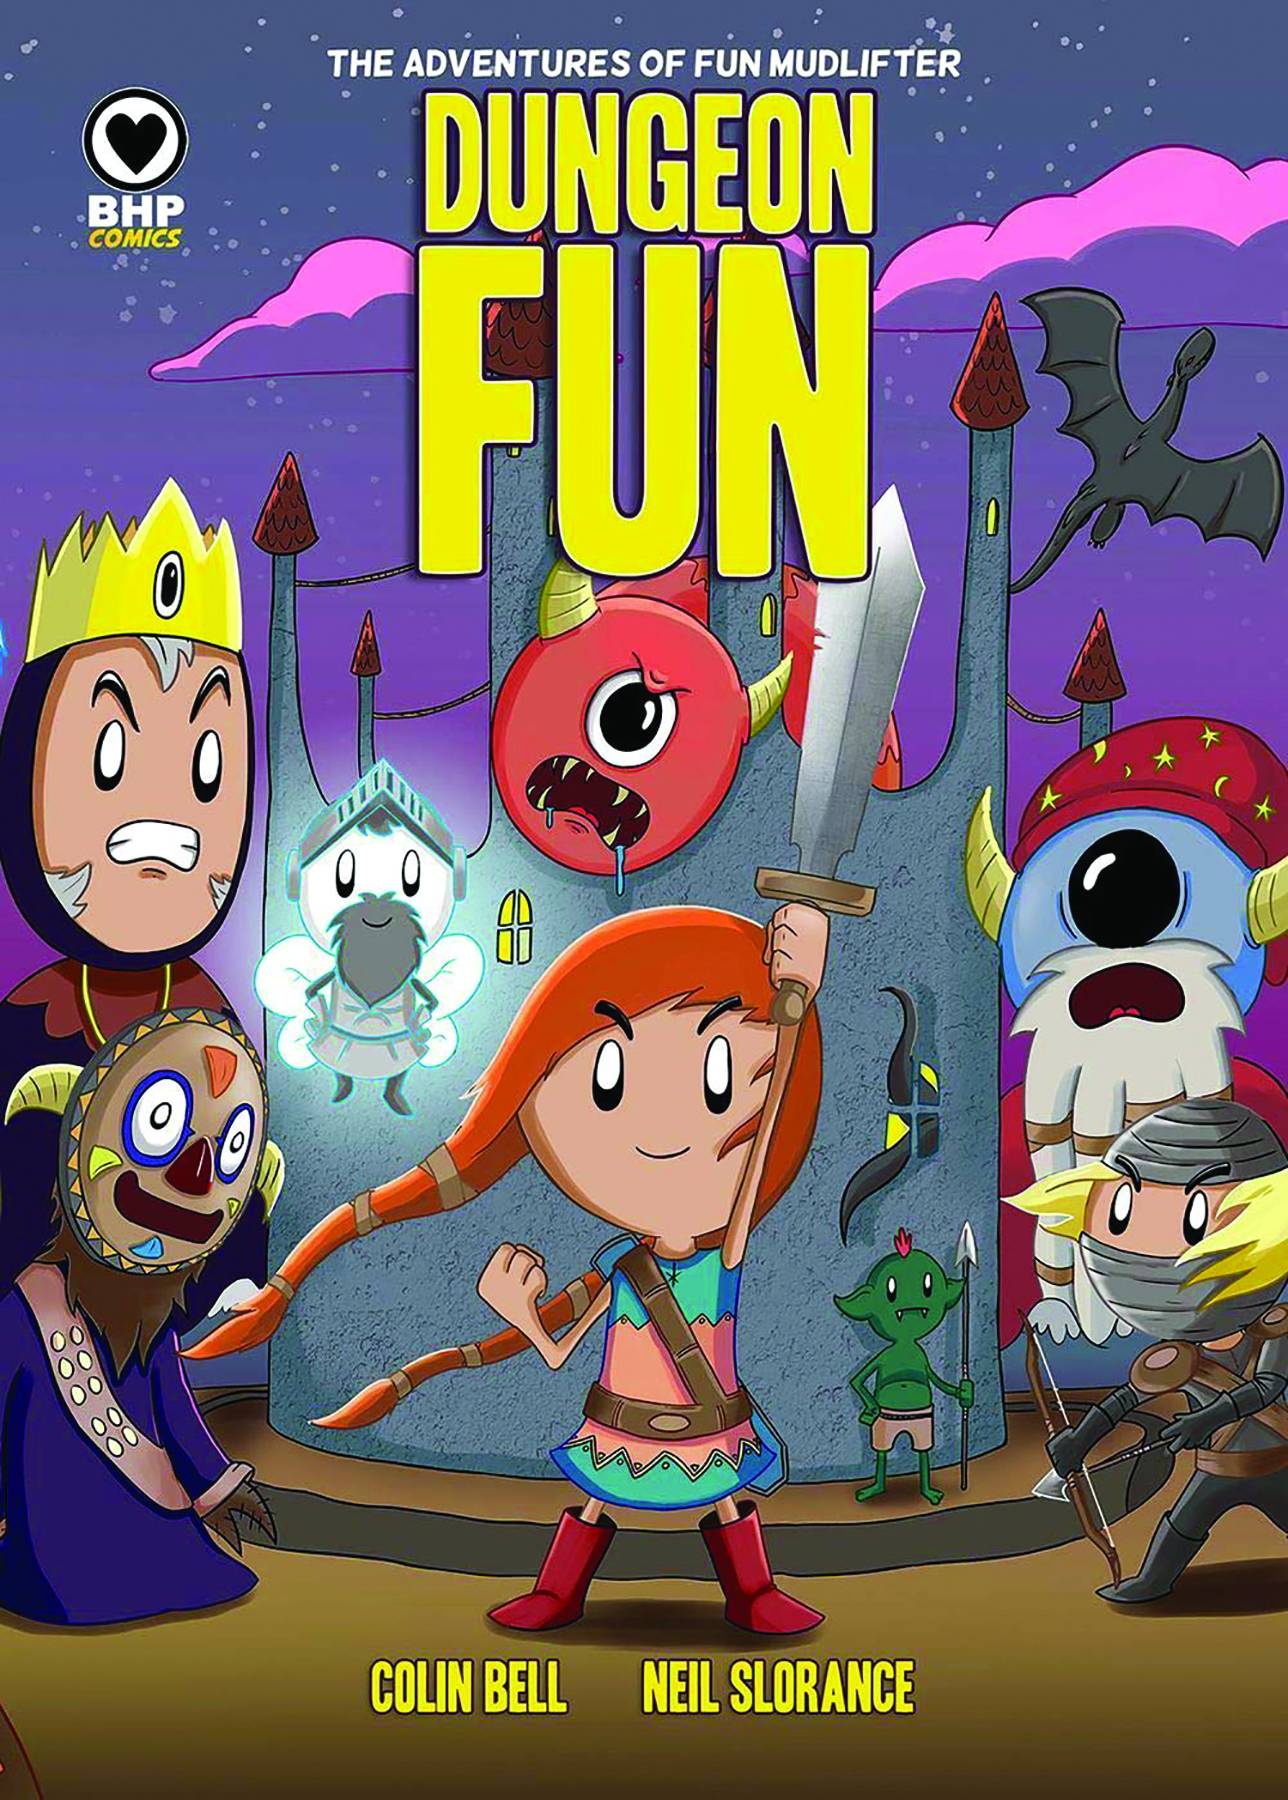 Dungeon Fun vol 1: The Adventures Of Fun Mudlifter